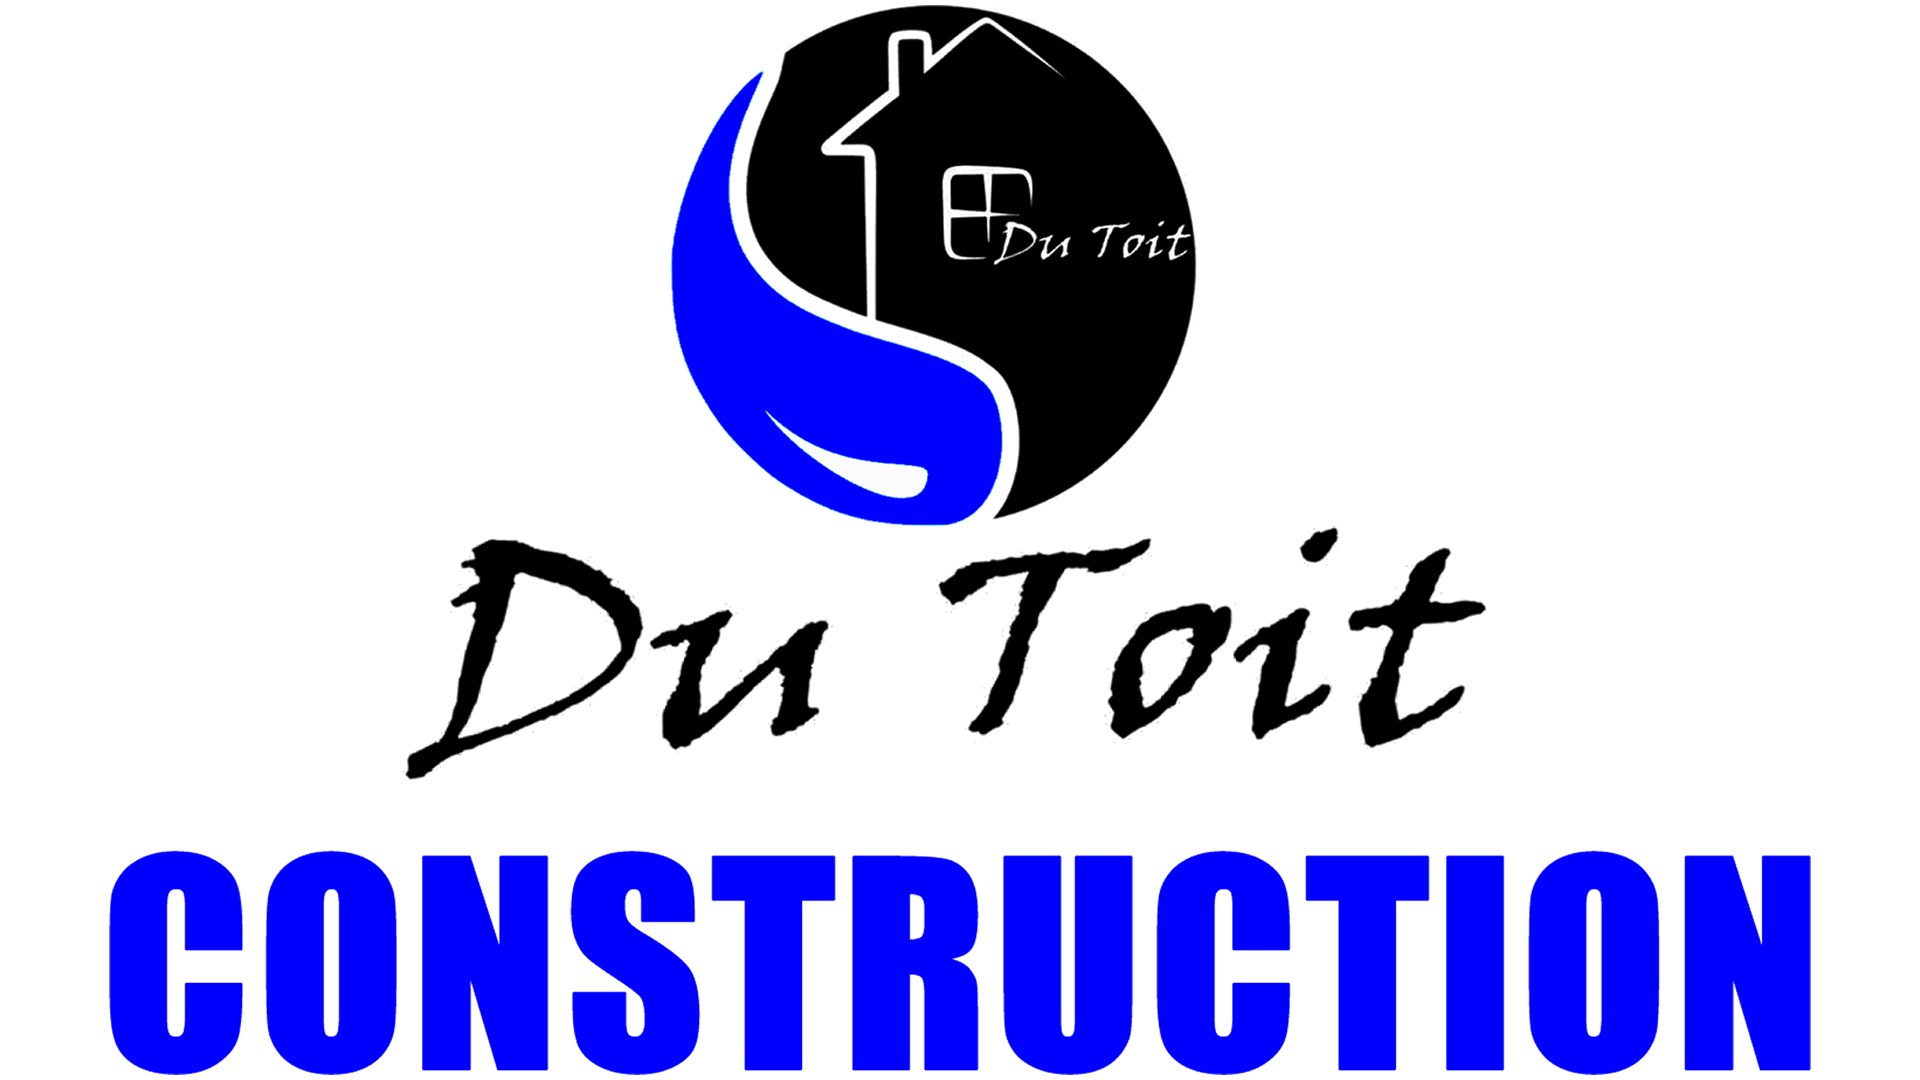 Du Toit Construction in George & Mossel Bay. Western Cape Home NHBCR registered Builder, House Repairs, Renovations, Maintenance, Property Development Building & Construction Services